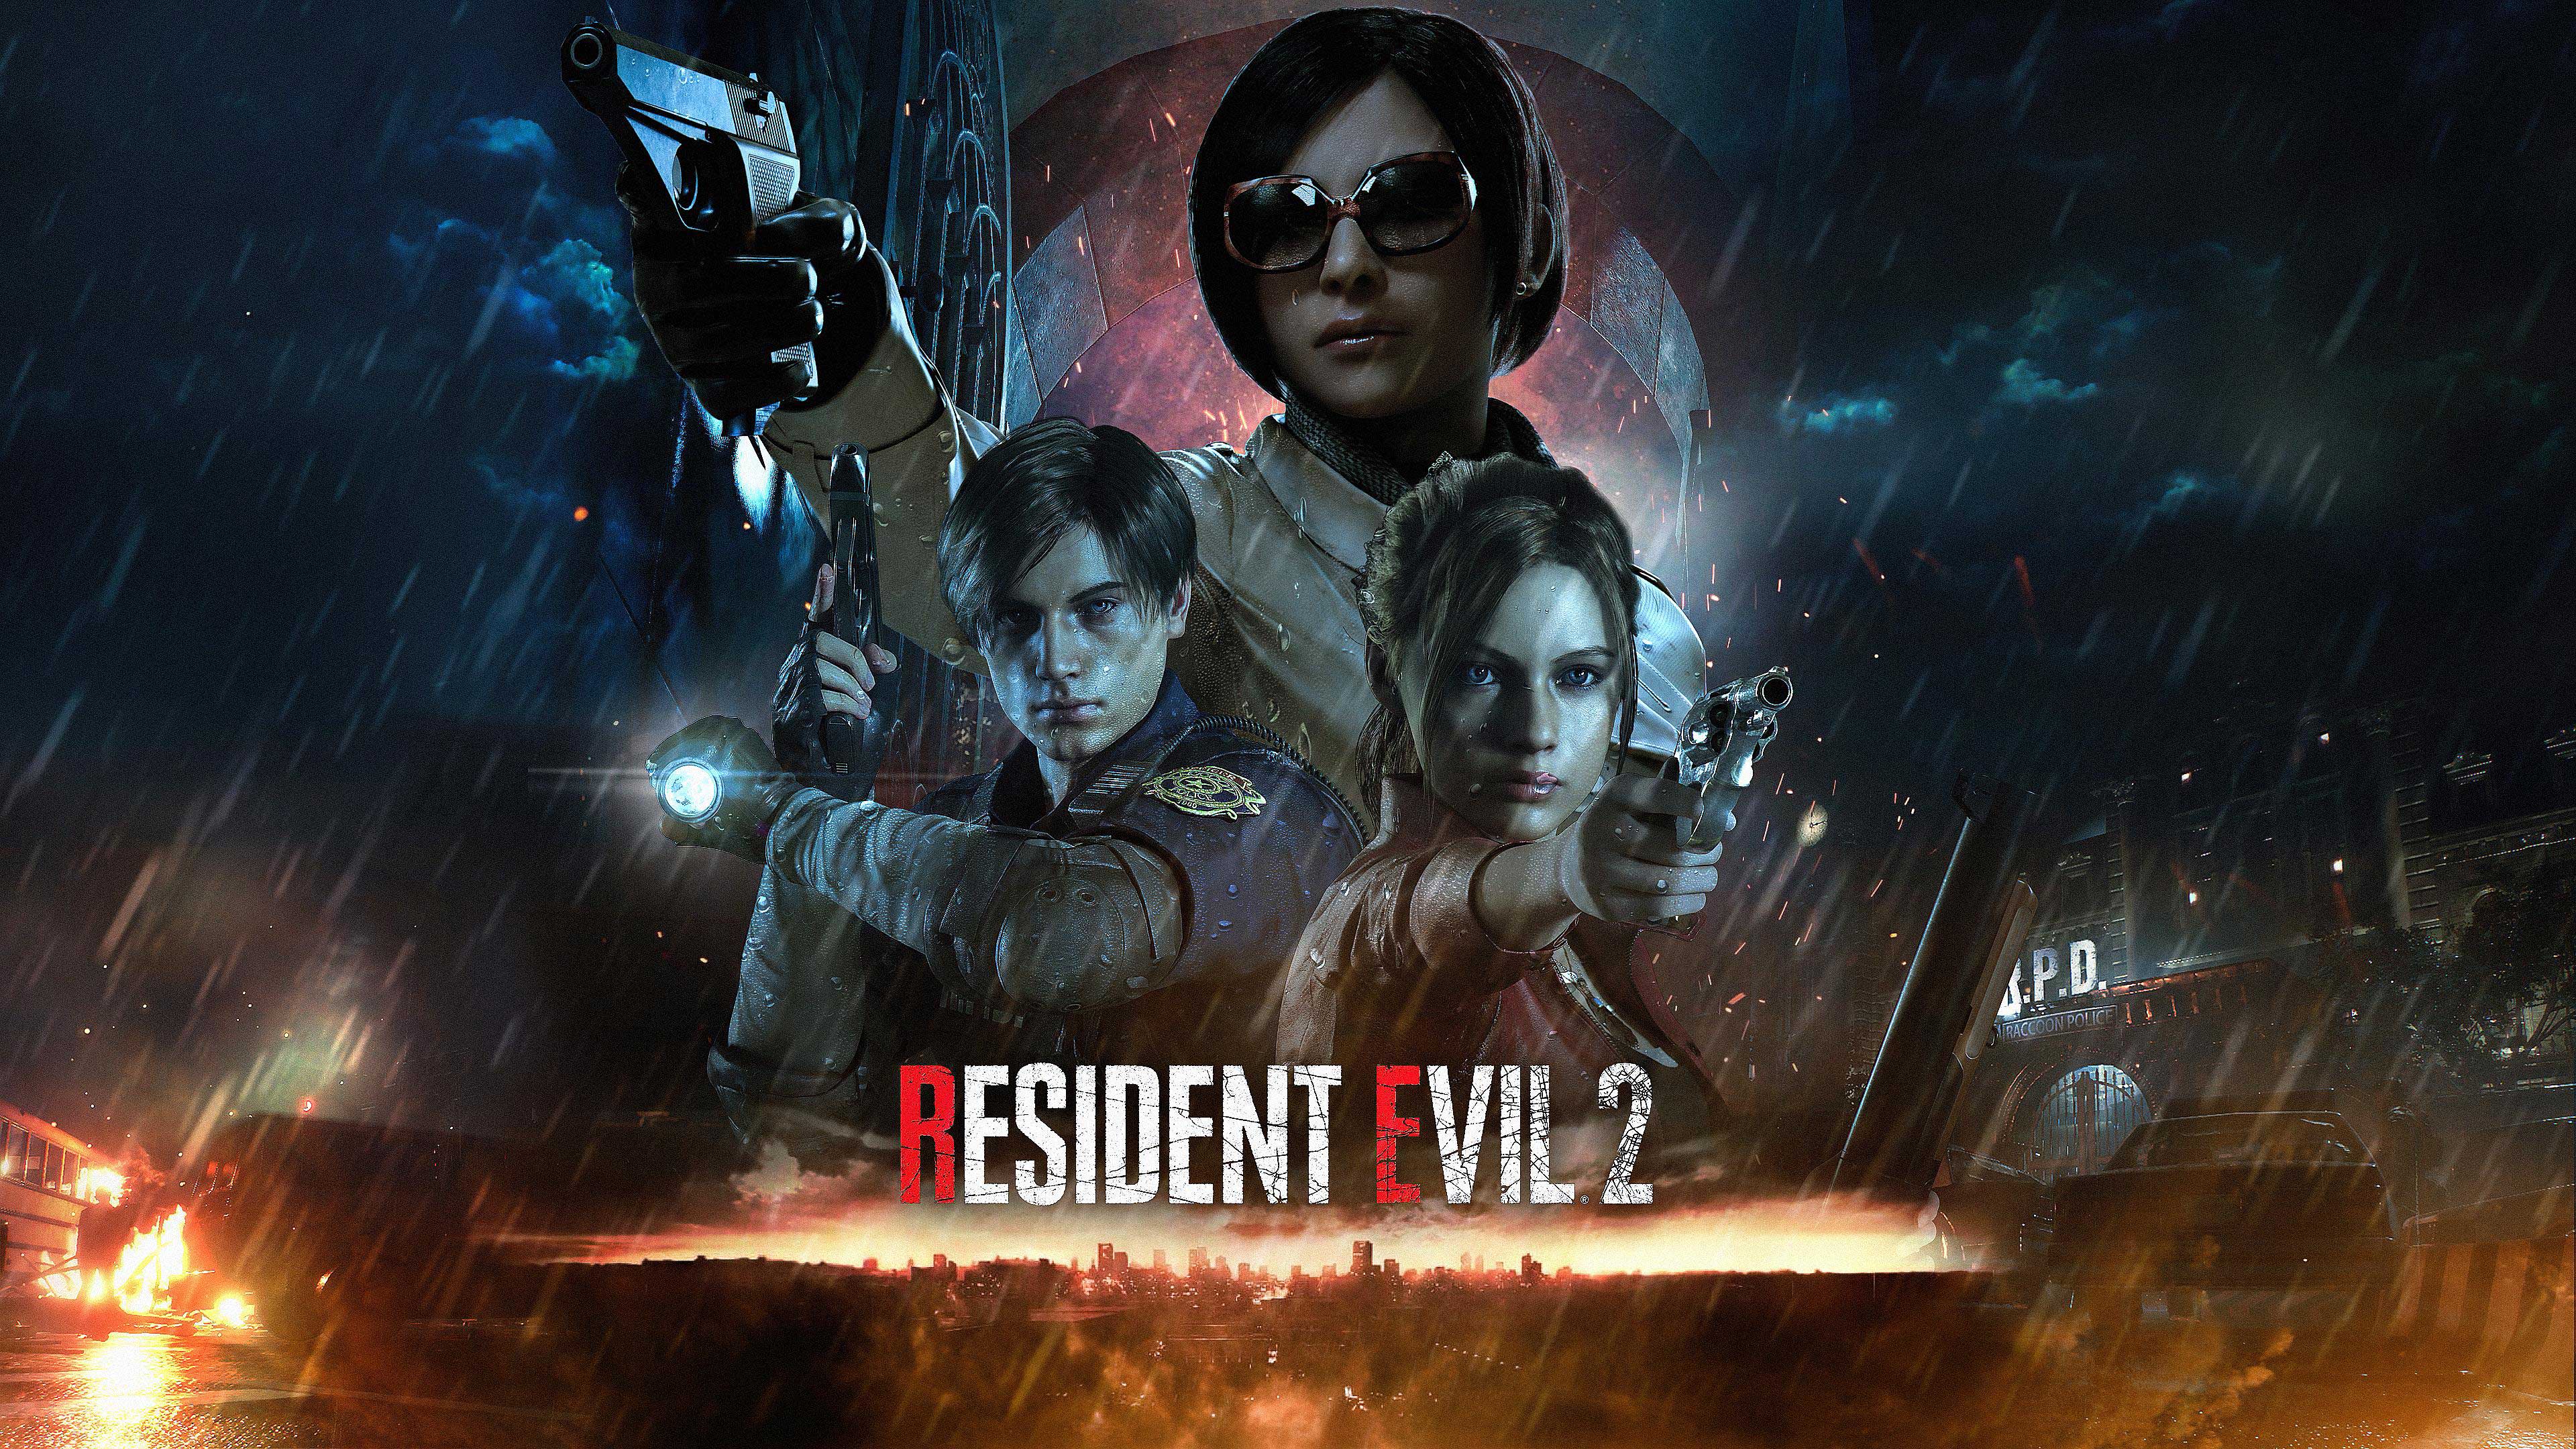 Resident Evil 2 Remake Wallpapers in Ultra HD